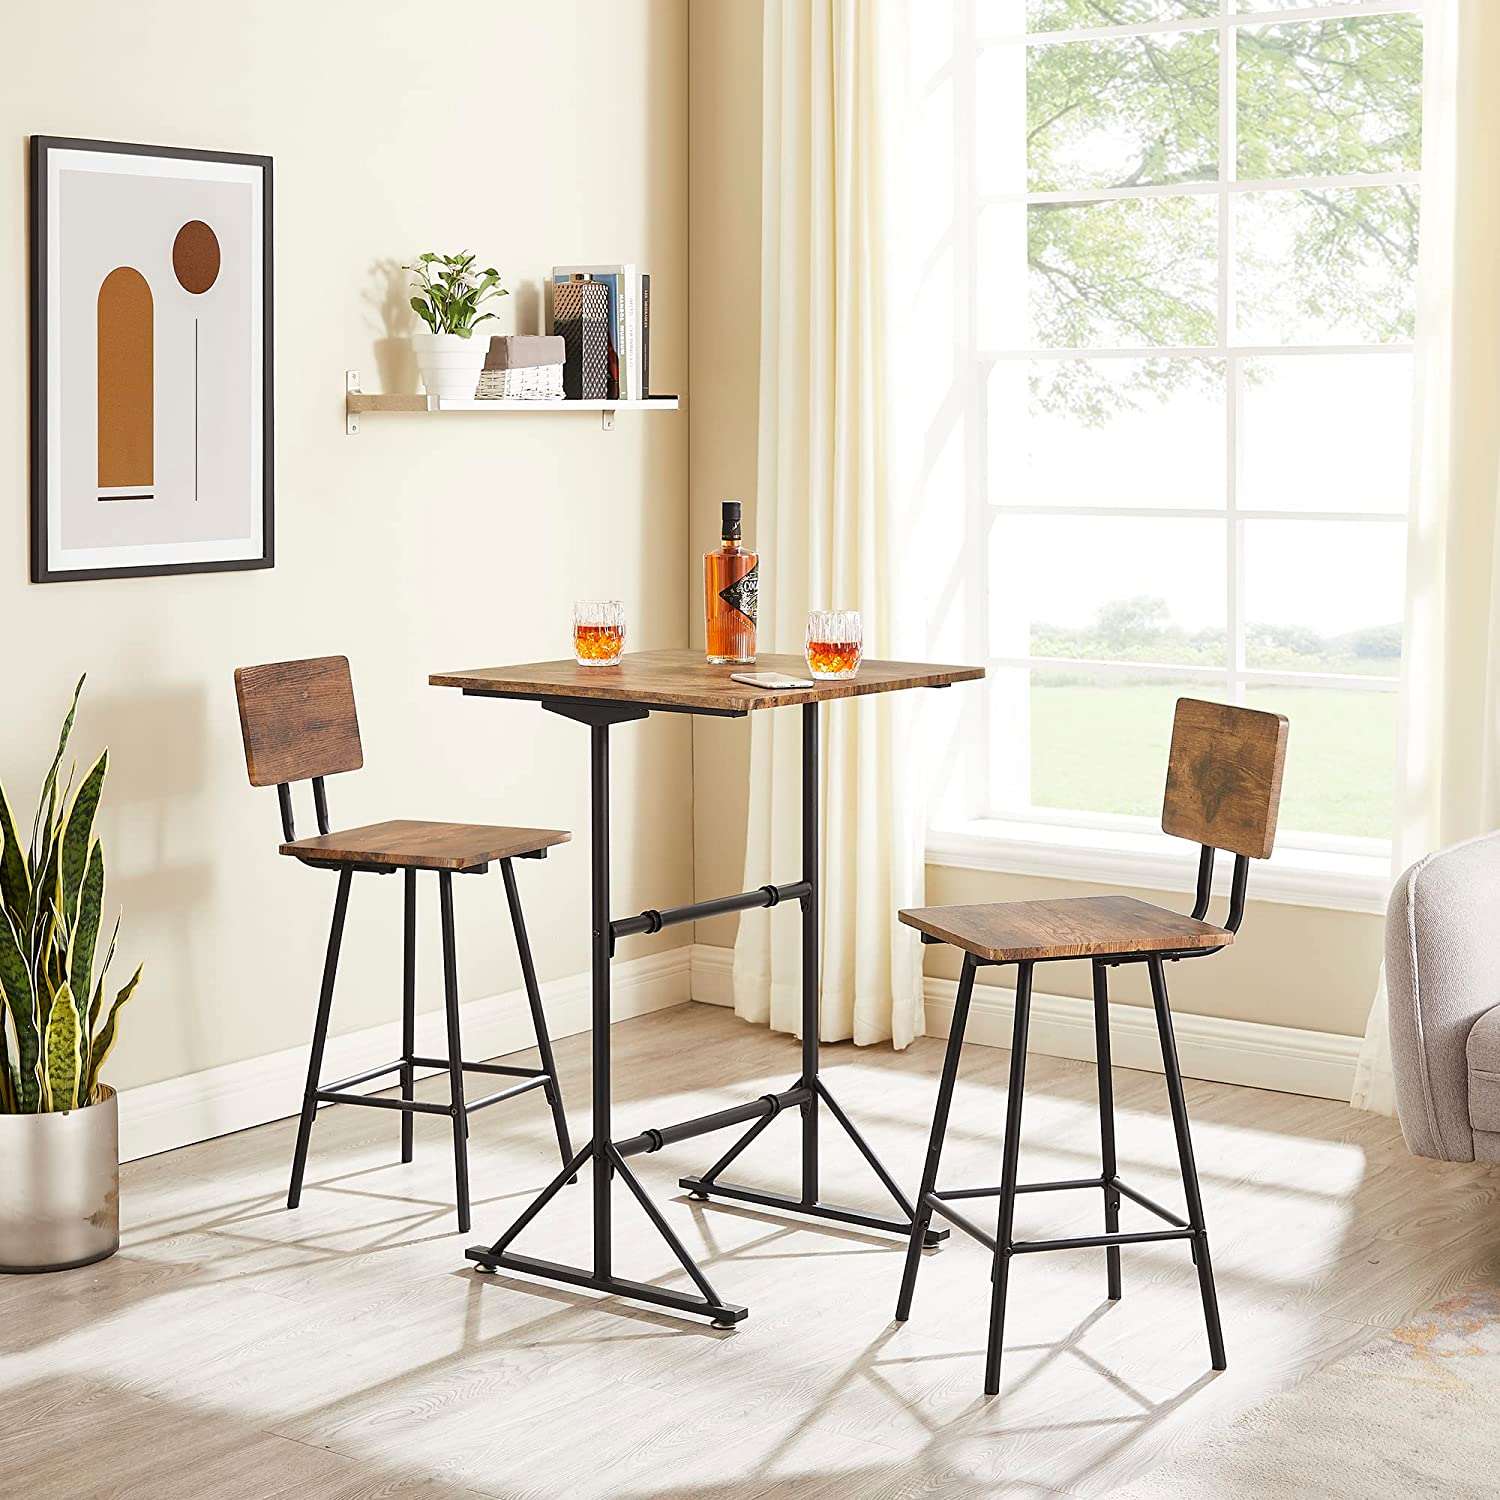 VECELO 3 Piece Bar Table Set, Wood Rectangle Counter Height Dinette with 2 Bistro Stools for Kitchen Breakfast Nook